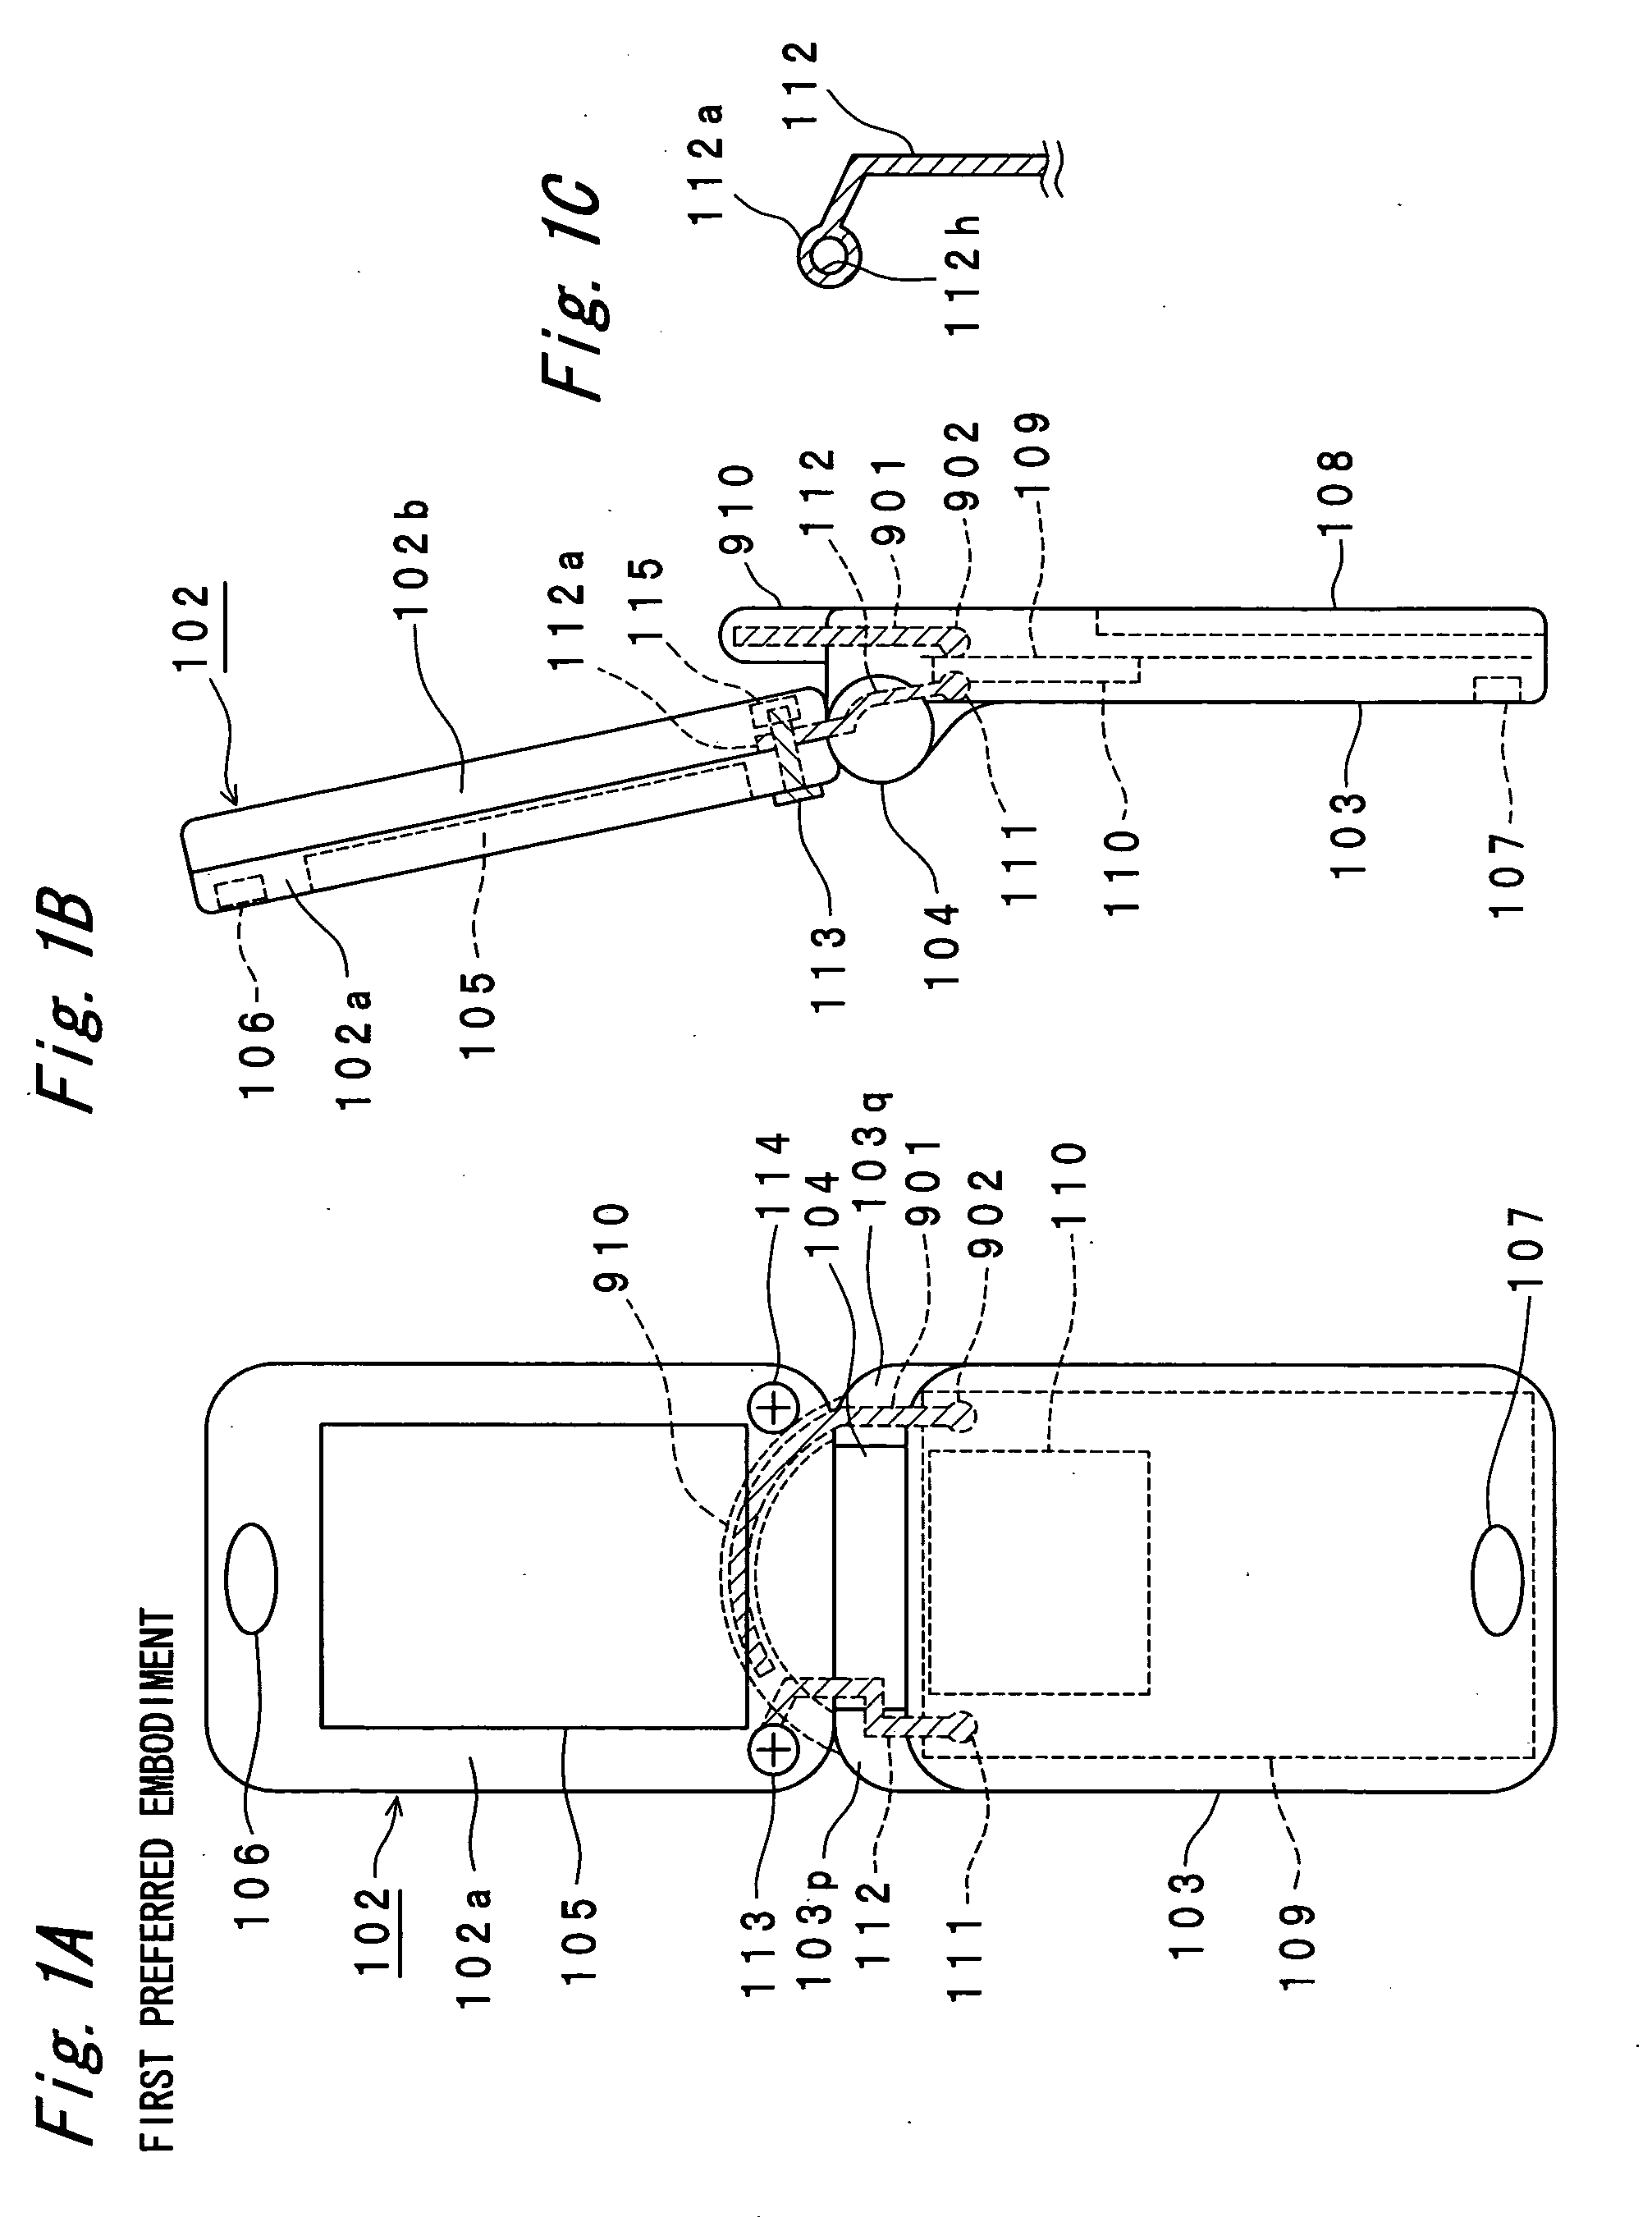 Portable radio communication apparatus provided with a boom portion and a part of housing operating as an antenna